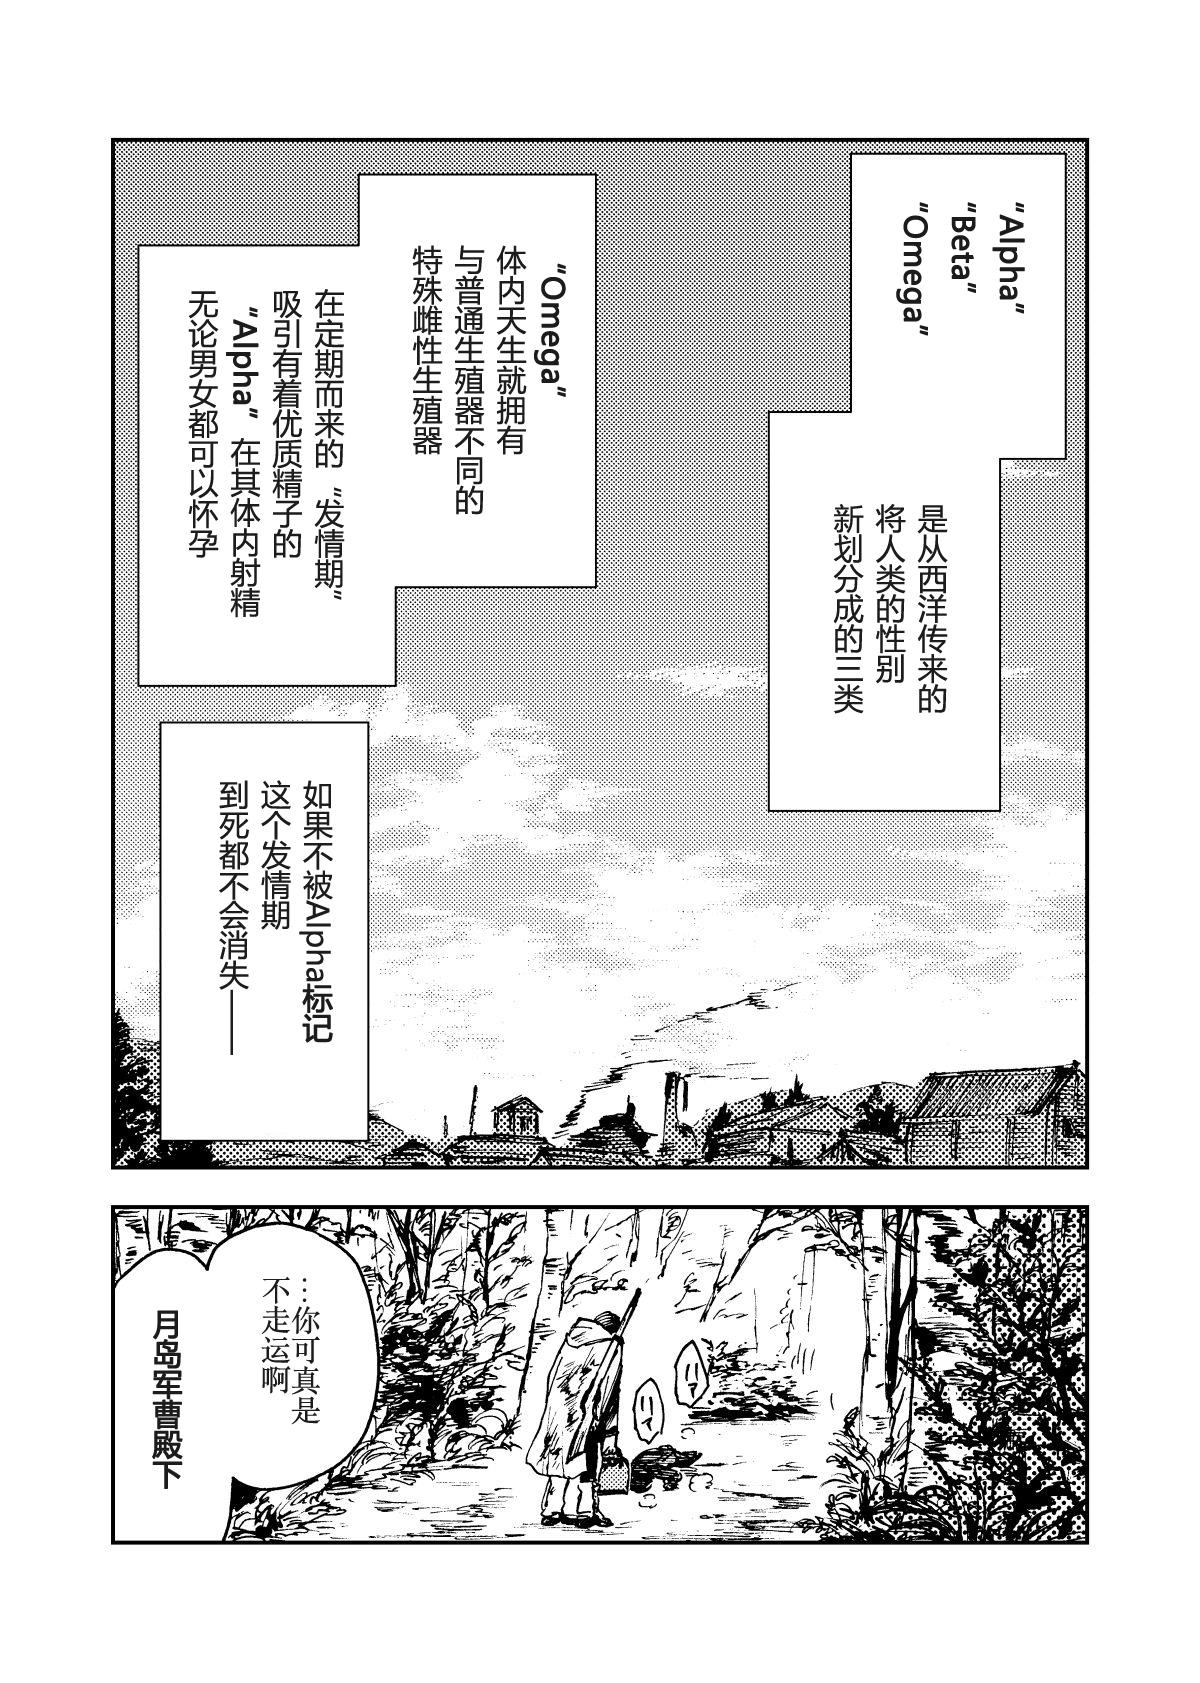 English （自汉化）啸猫弄月（Chinese） - Golden kamuy Hot Wife - Page 2